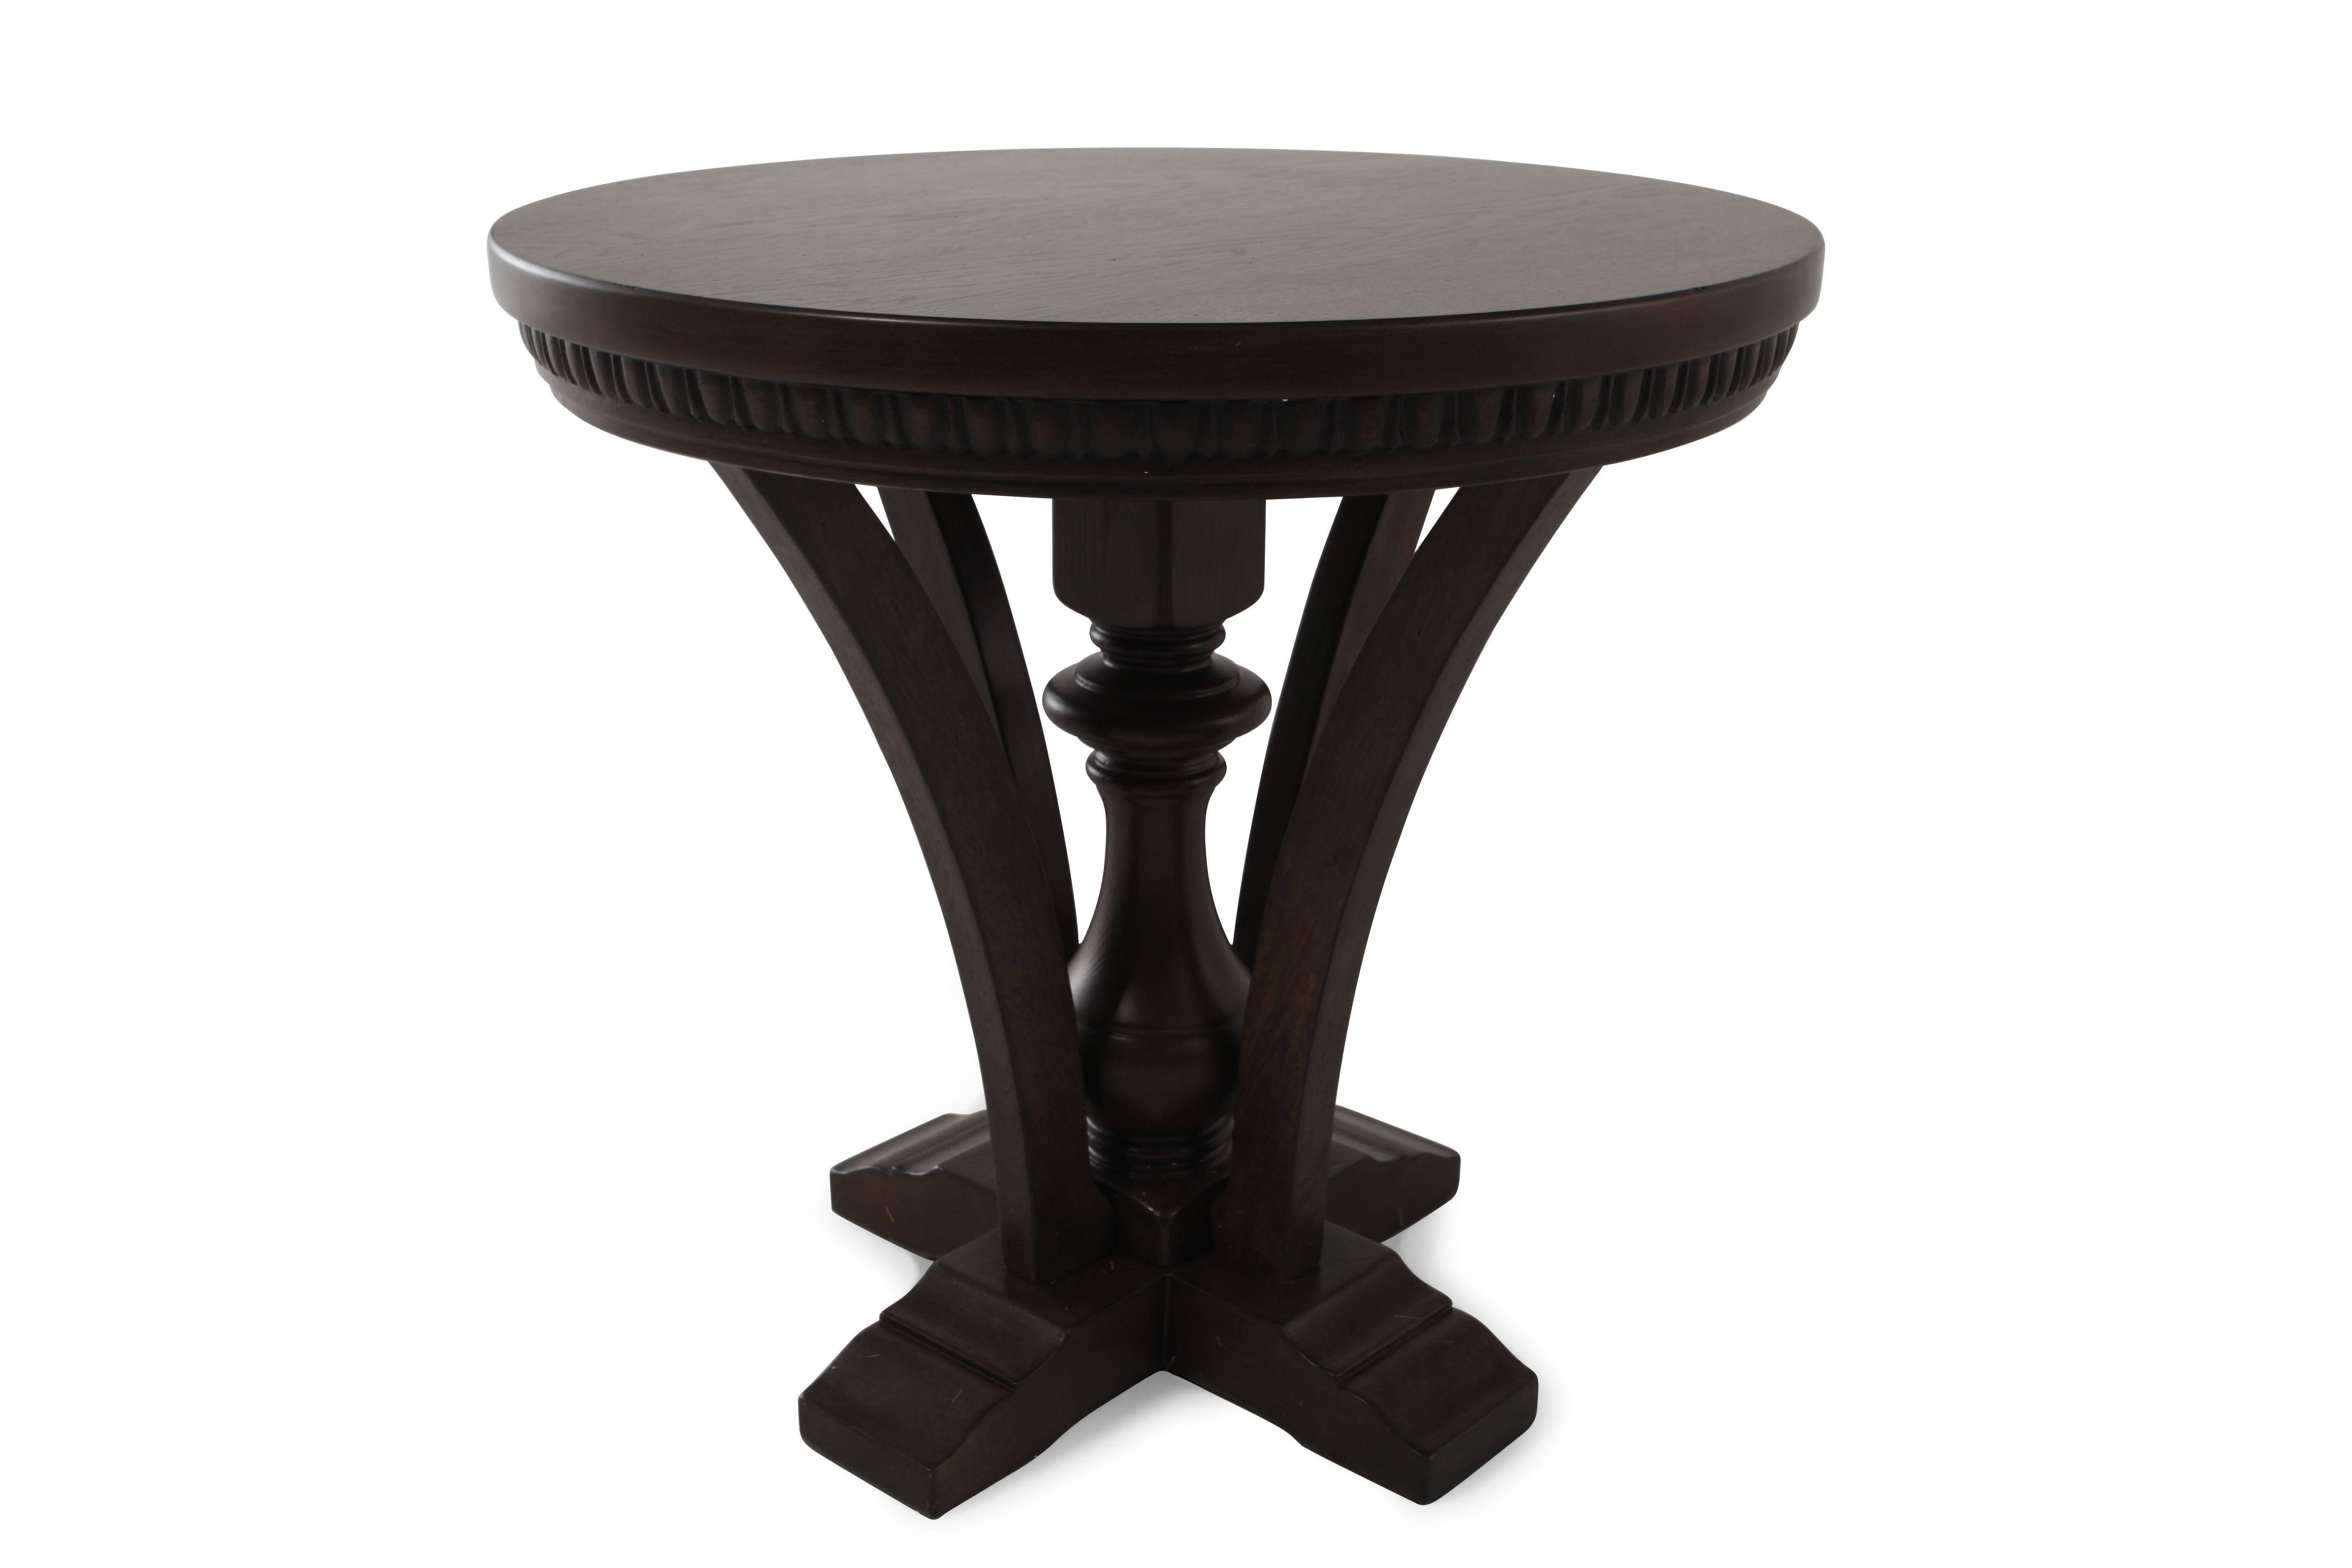 gorgeous distressed white round accent table pliva tablecloths side antique metal street threshold black top value kitchen wood marble and chairs bulk tablet melamine gloss best